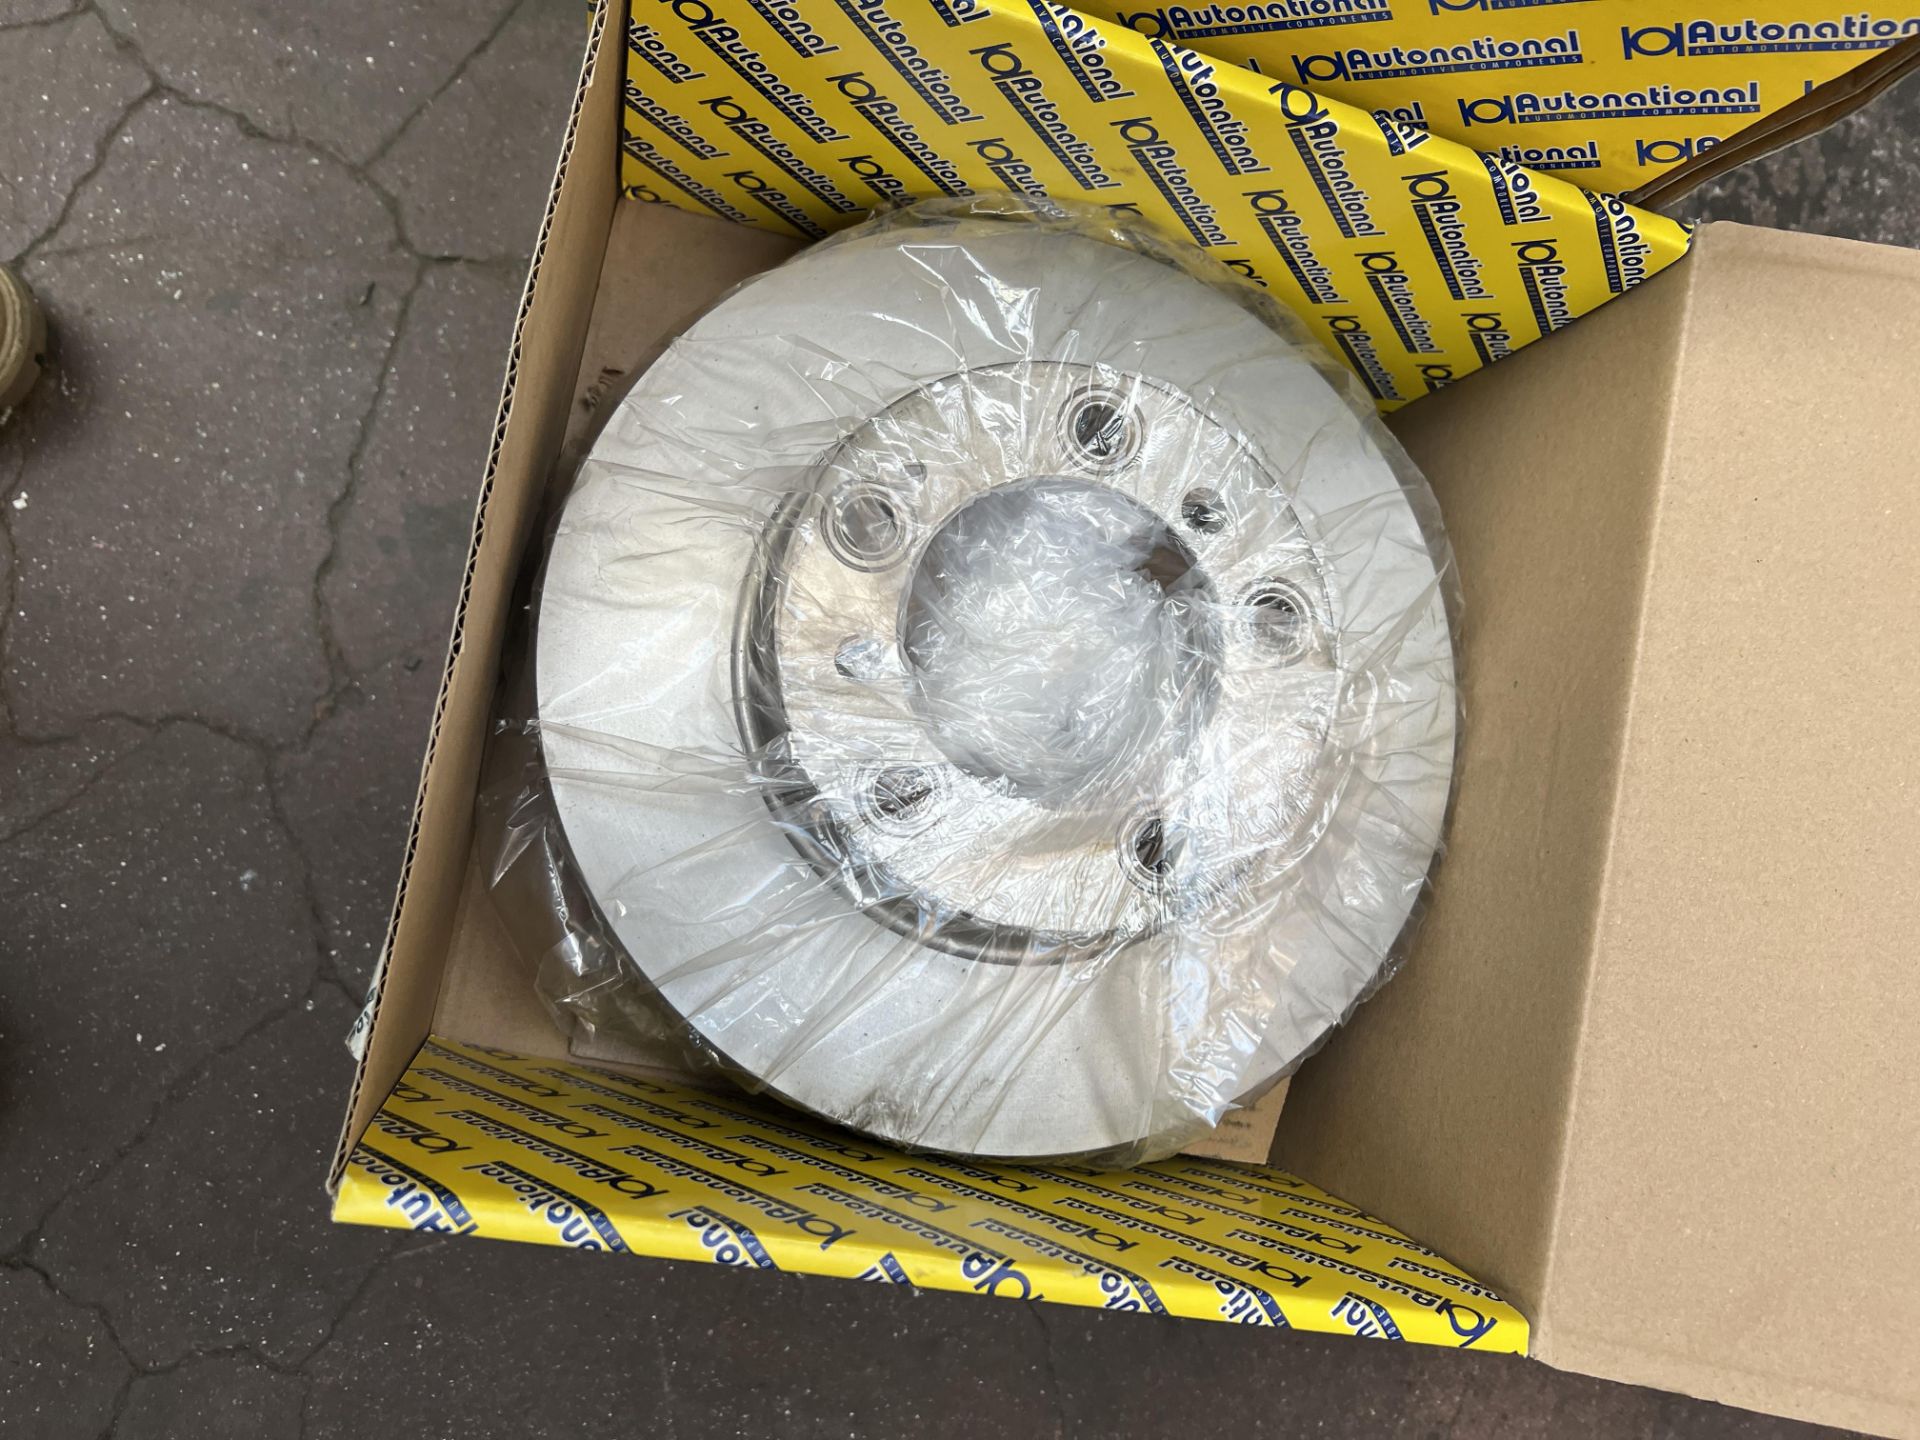 15: Boxed Autonational Vented Brake Discs for Porsche Boxster (BDC1604) and 911 (BDC1705) models - Image 5 of 9